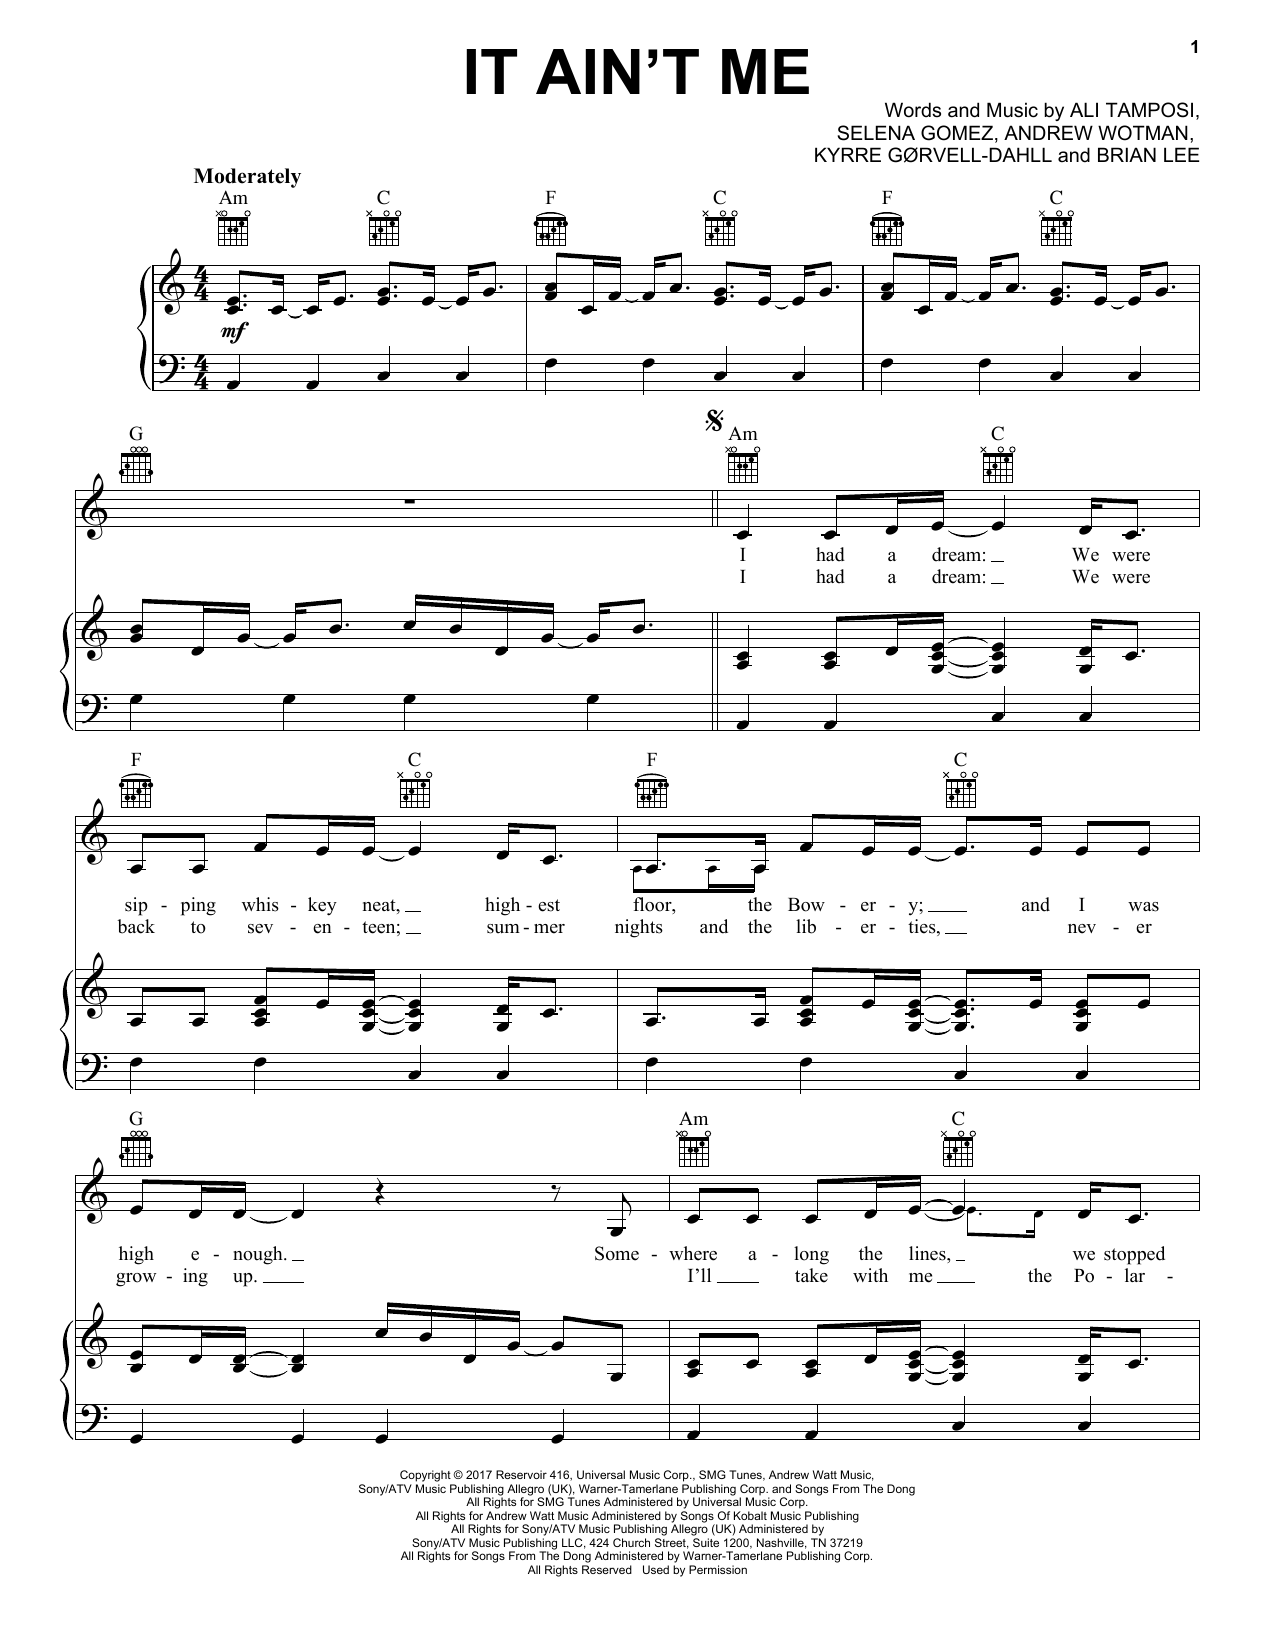 Kygo and Selena Gomez It Ain't Me sheet music notes and chords. Download Printable PDF.